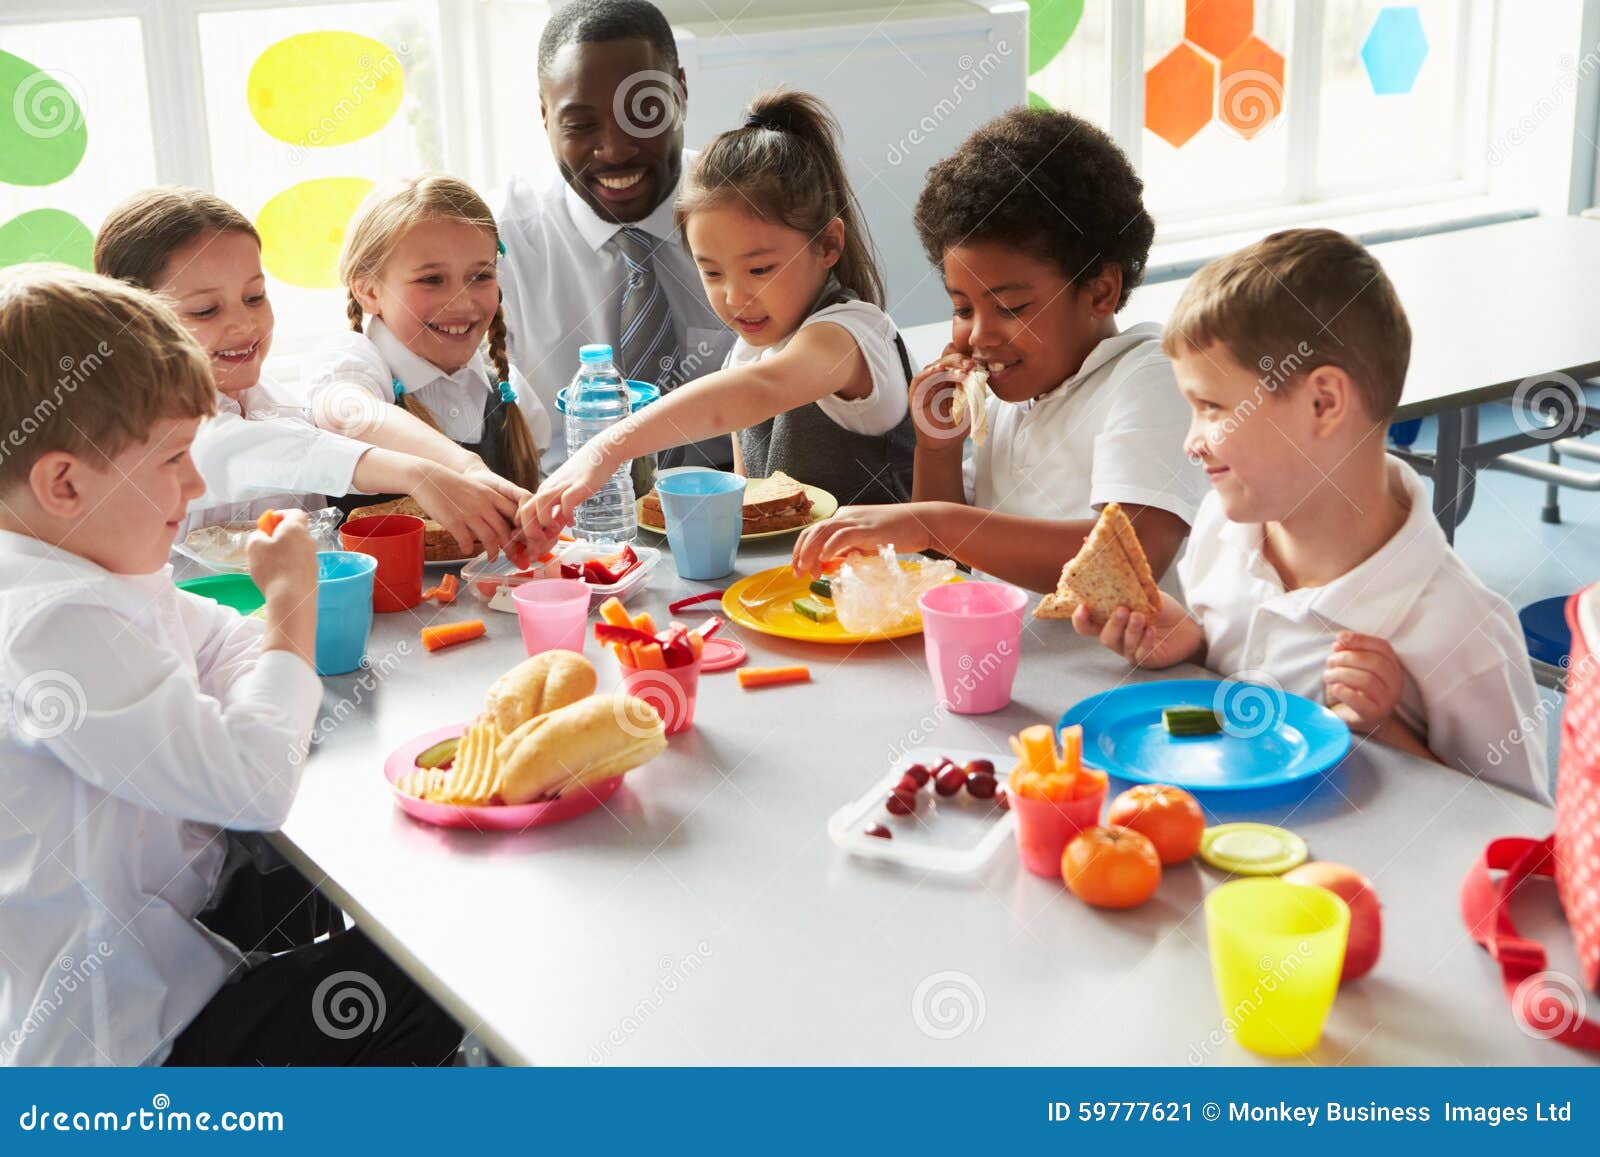 https://thumbs.dreamstime.com/z/group-children-eating-lunch-school-cafeteria-59777621.jpg